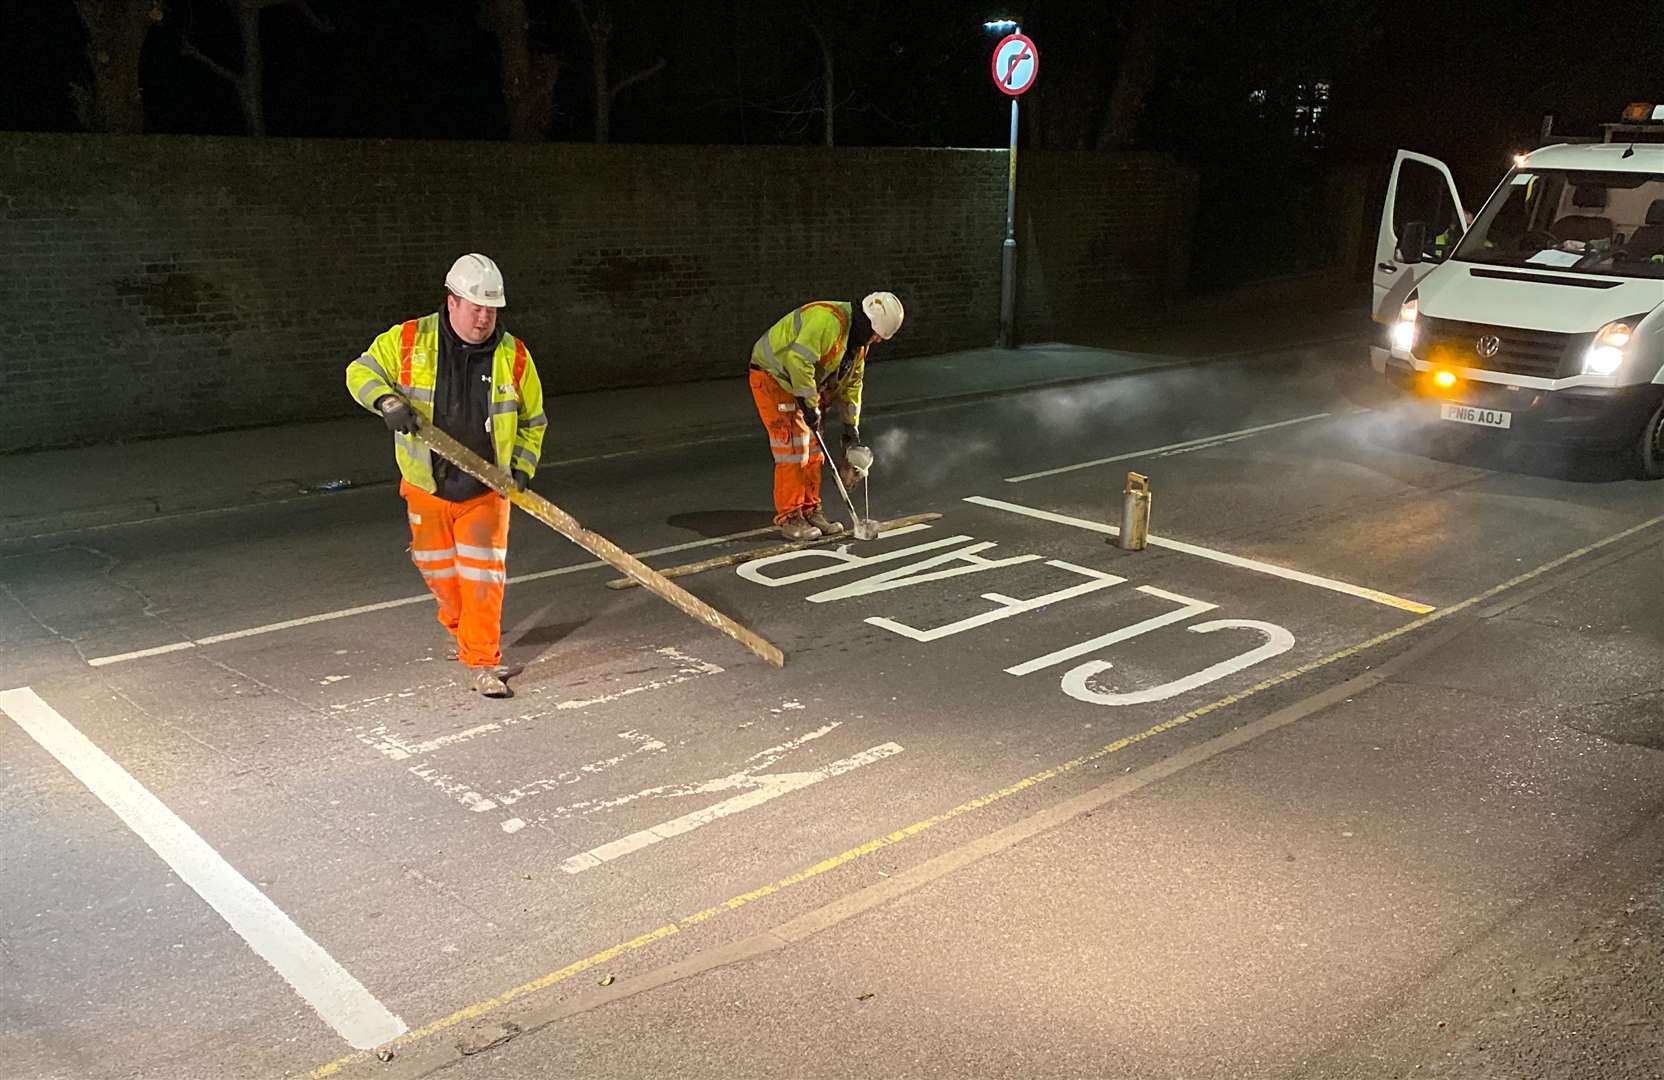 Simon Tyler took this picture of "brilliant" workmen updating the ‘Keep Clear’ lines outside his house